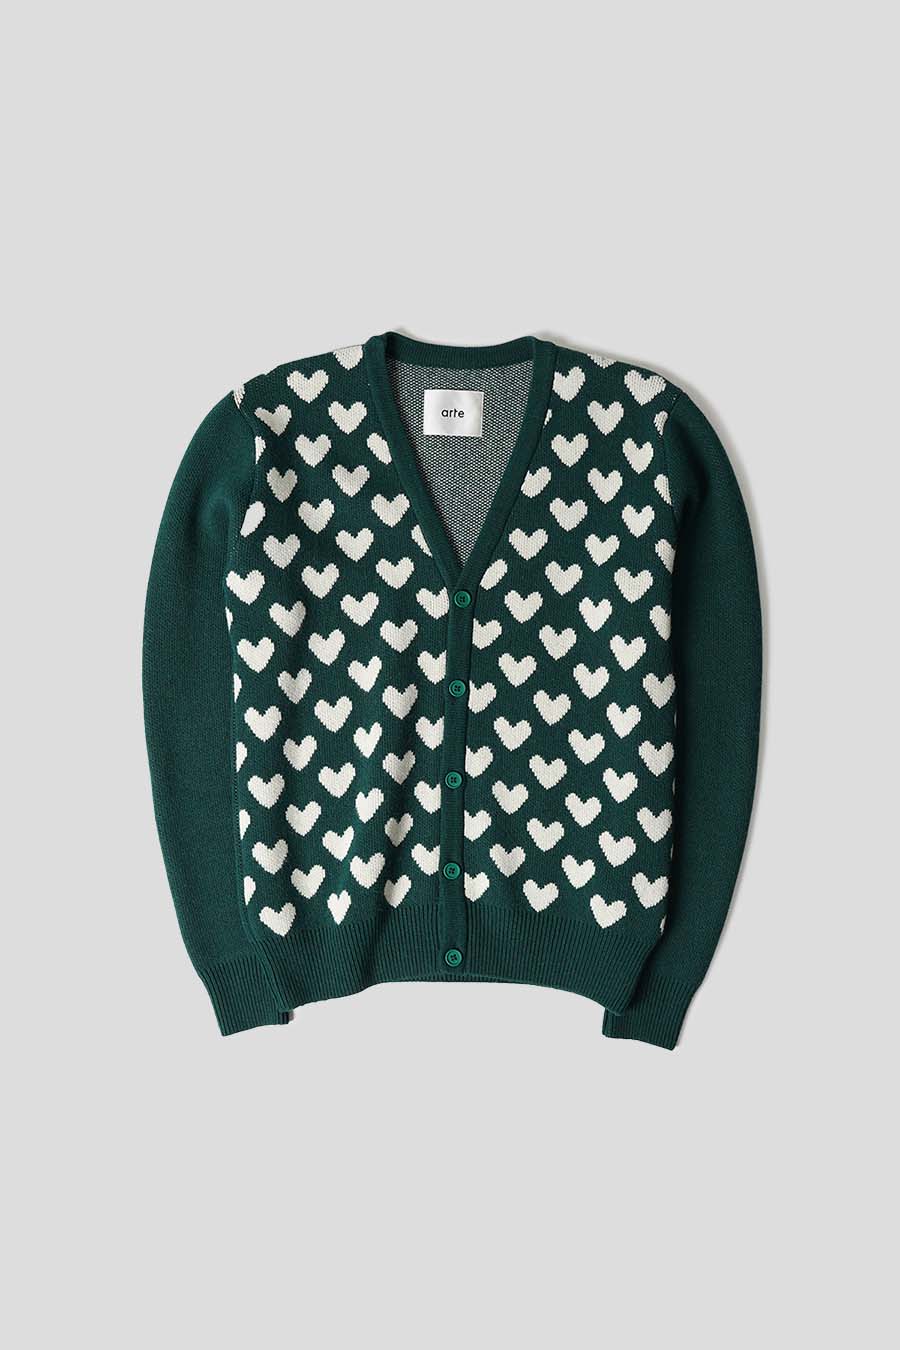 Arte - KYLE HEART GREEN AND WHITE CARDIGAN - LE LABO STORE